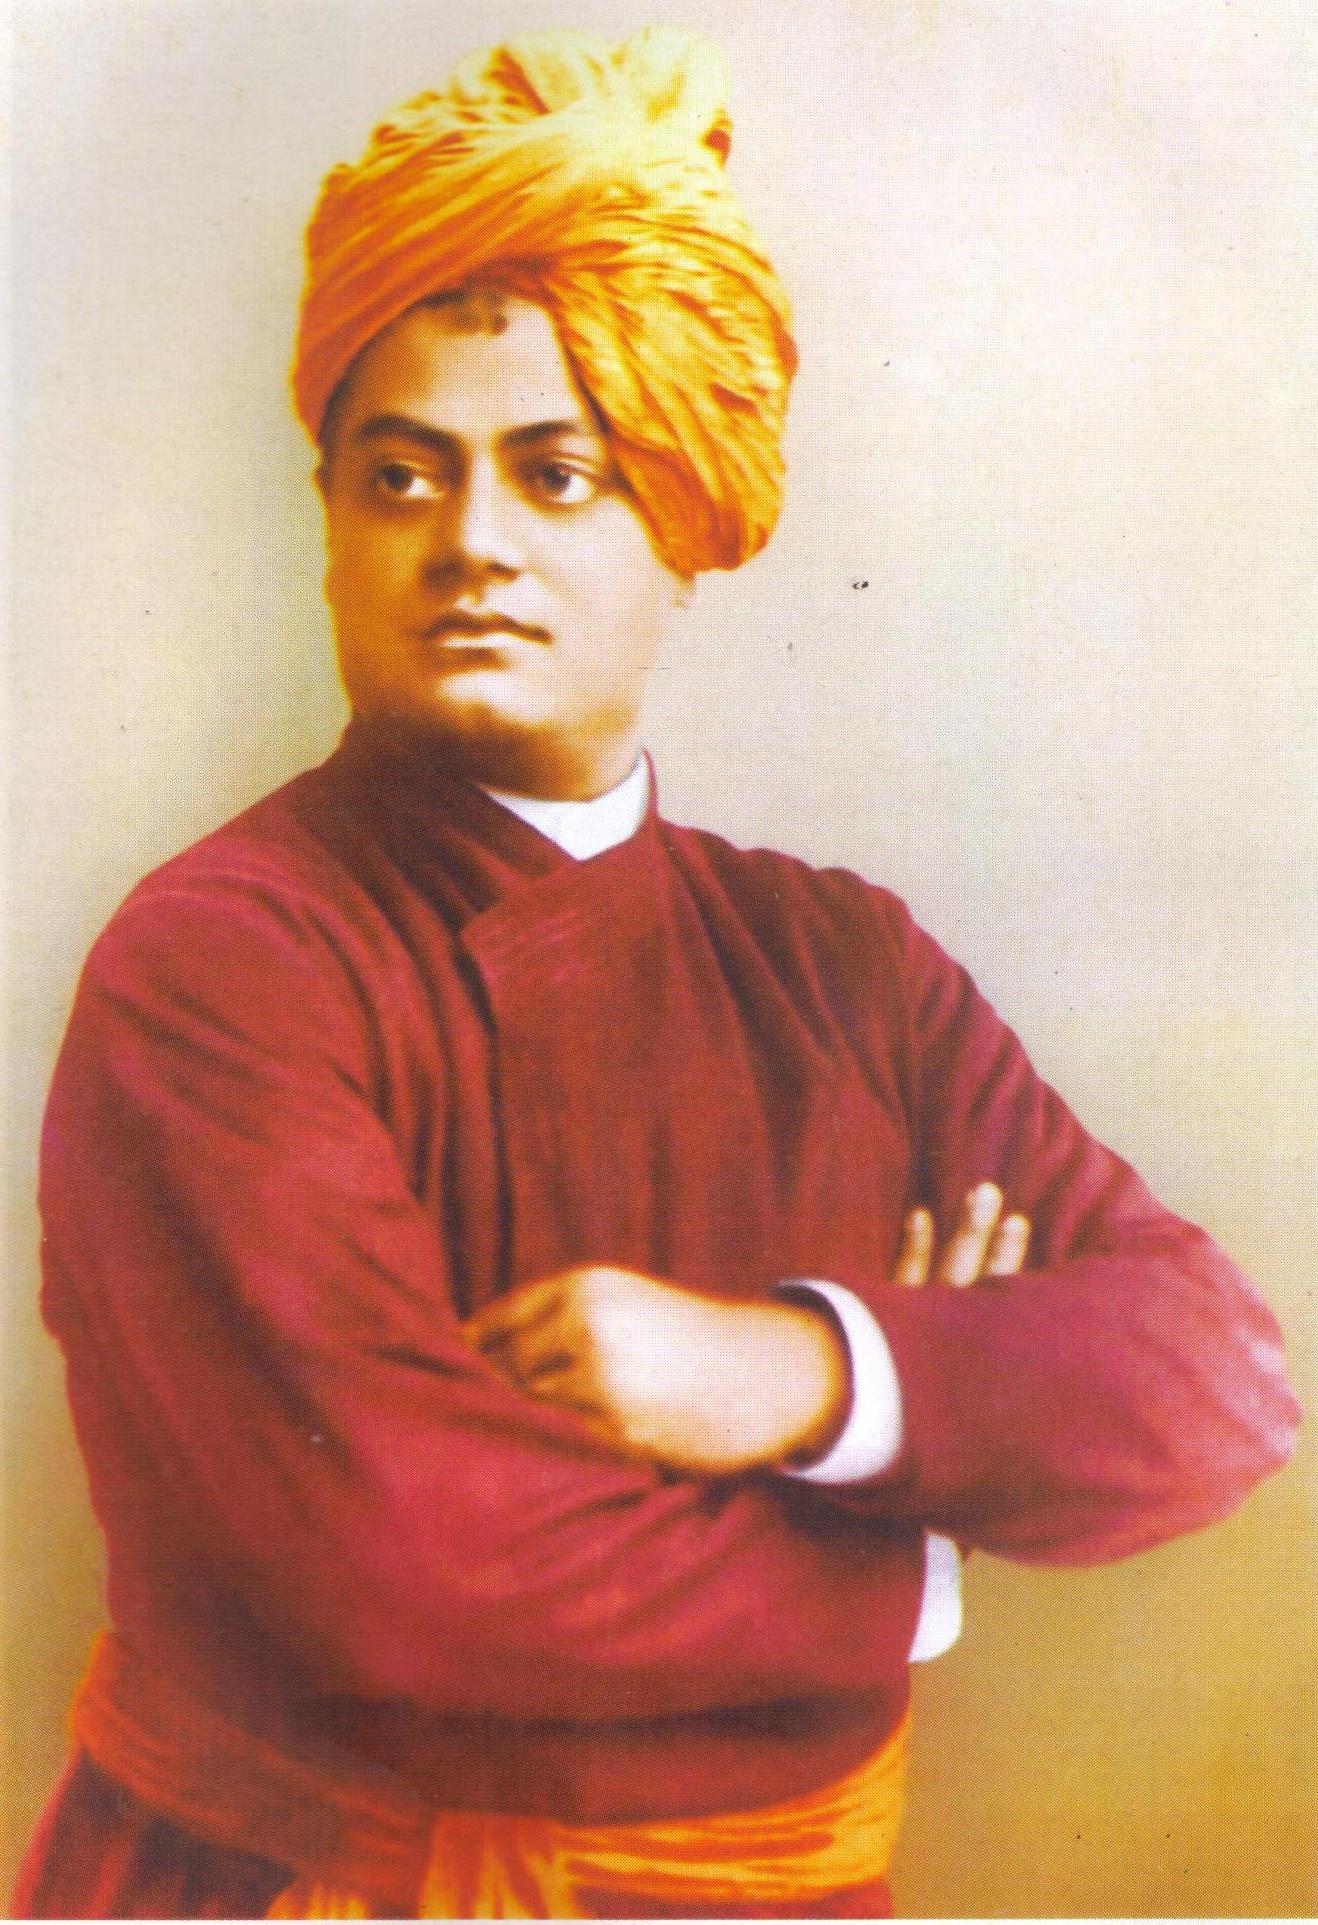 INTER-RELIGIOUS HARMONY FROM THE STANDPOINTS OF SRI RAMAKRISHNAAND SWAMI VIVEKANANDA, AND ITS RELEVANCE IN CONTEMPORARY INDIA.